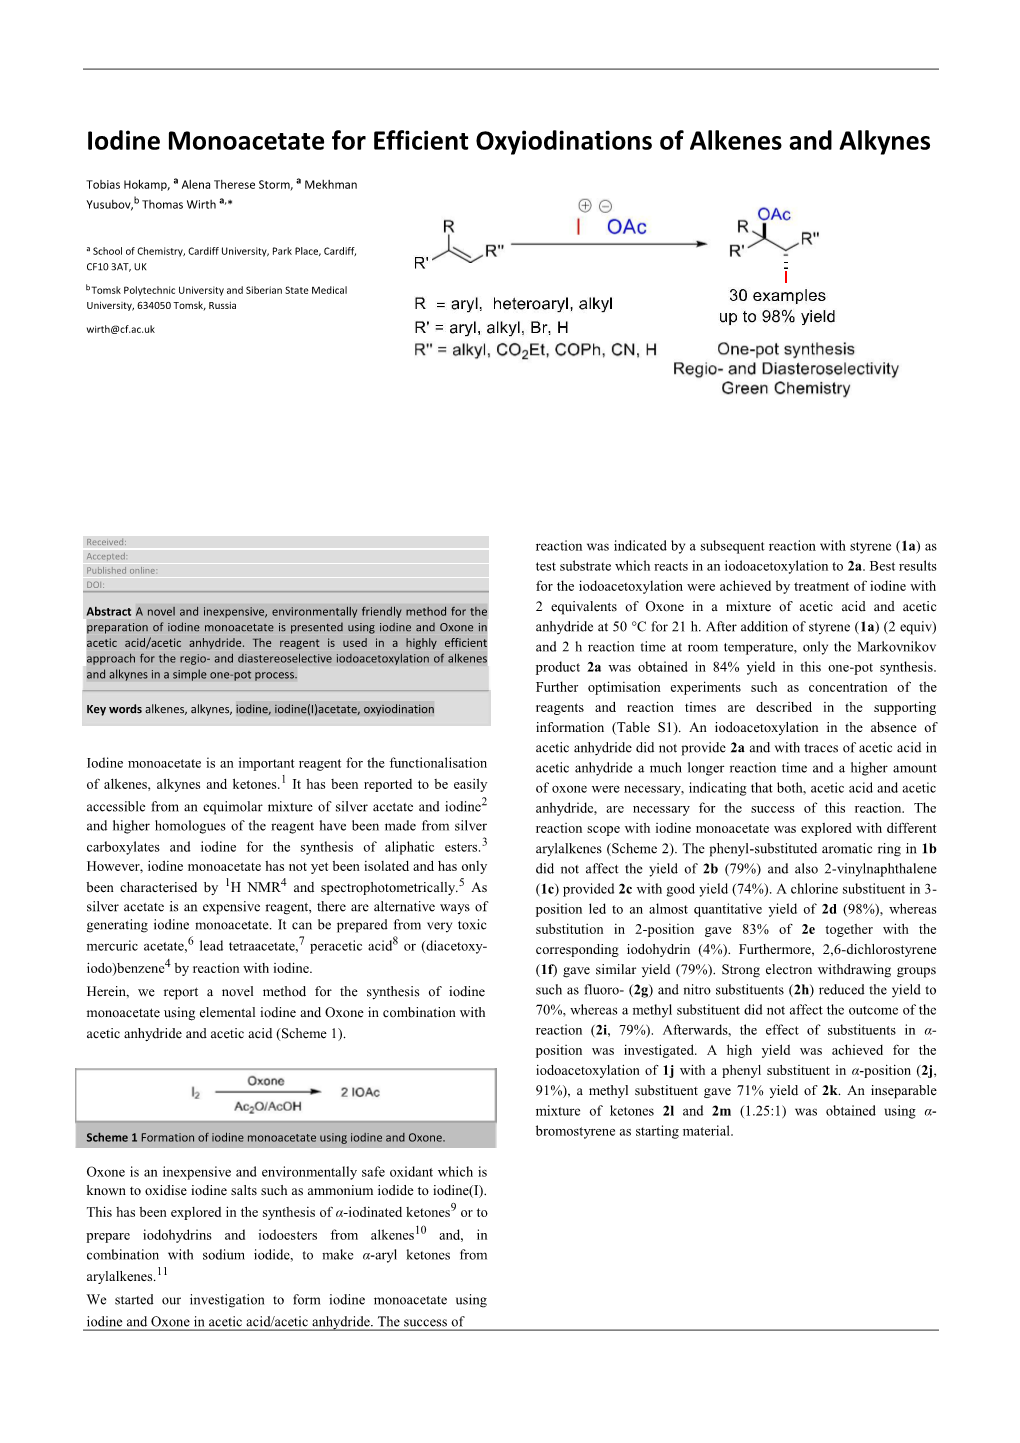 Iodine Monoacetate for Efficient Oxyiodinations of Alkenes and Alkynes